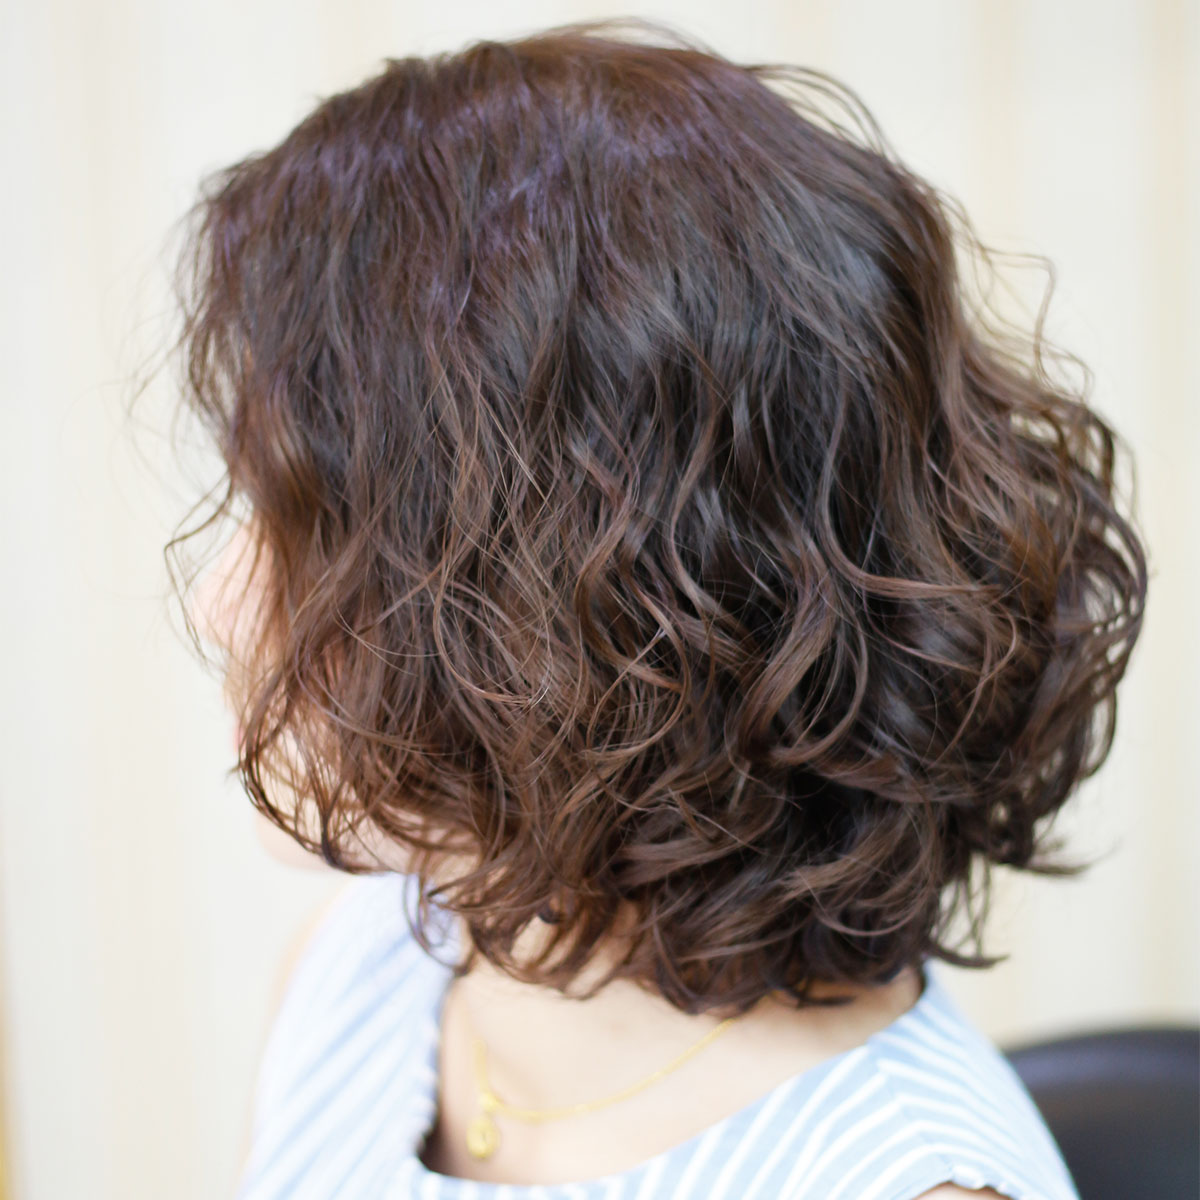 The Bob Hairstyle That Women With Curly Hair Should Never Ask For, Stylists Warn